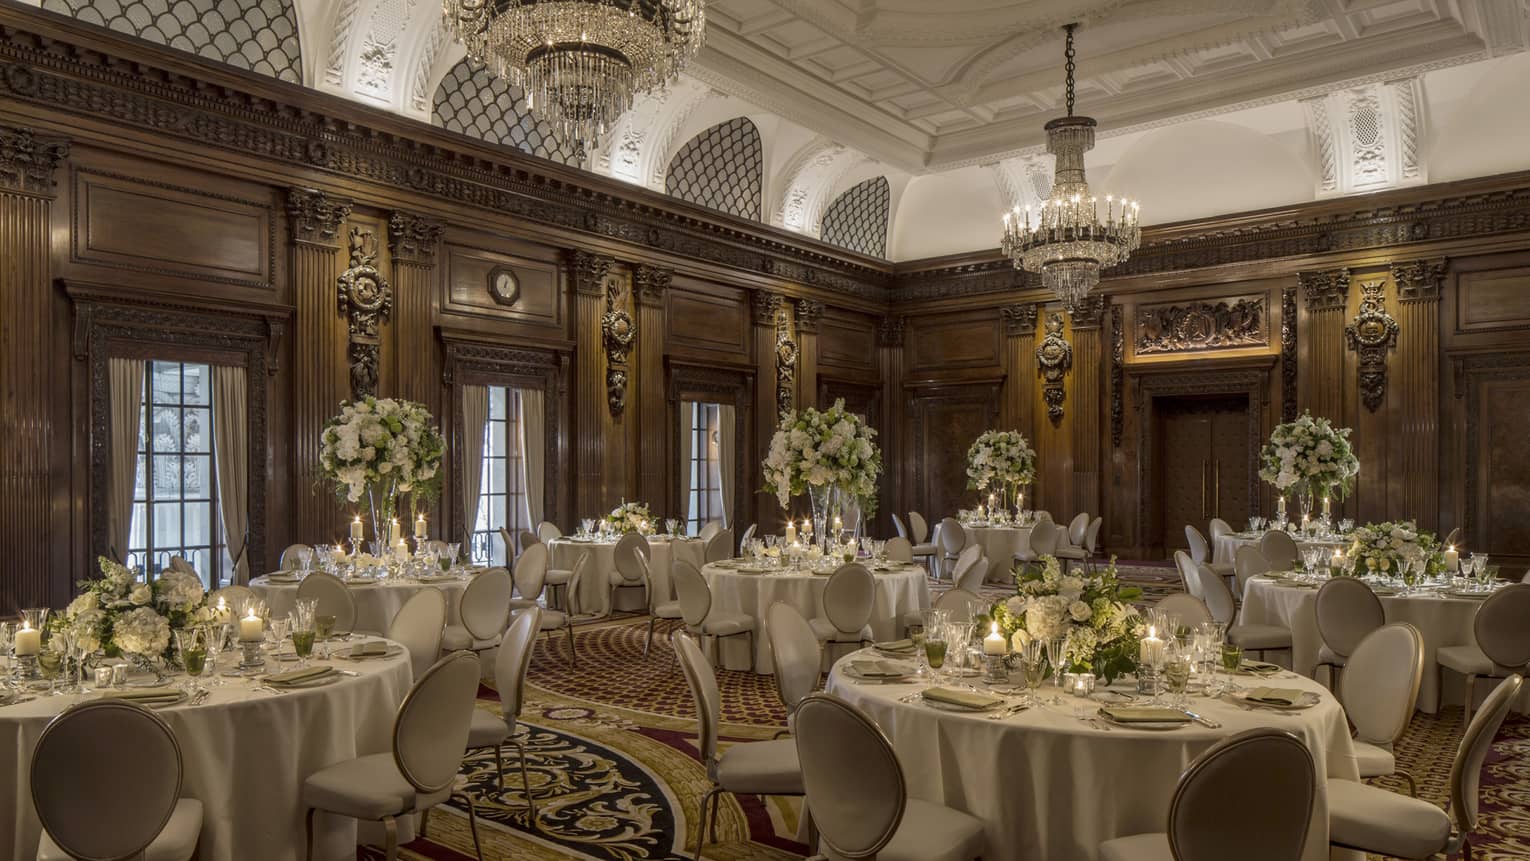 Elegant ballroom with decorative wood walls, crystal chandeliers over round banquet dining tables